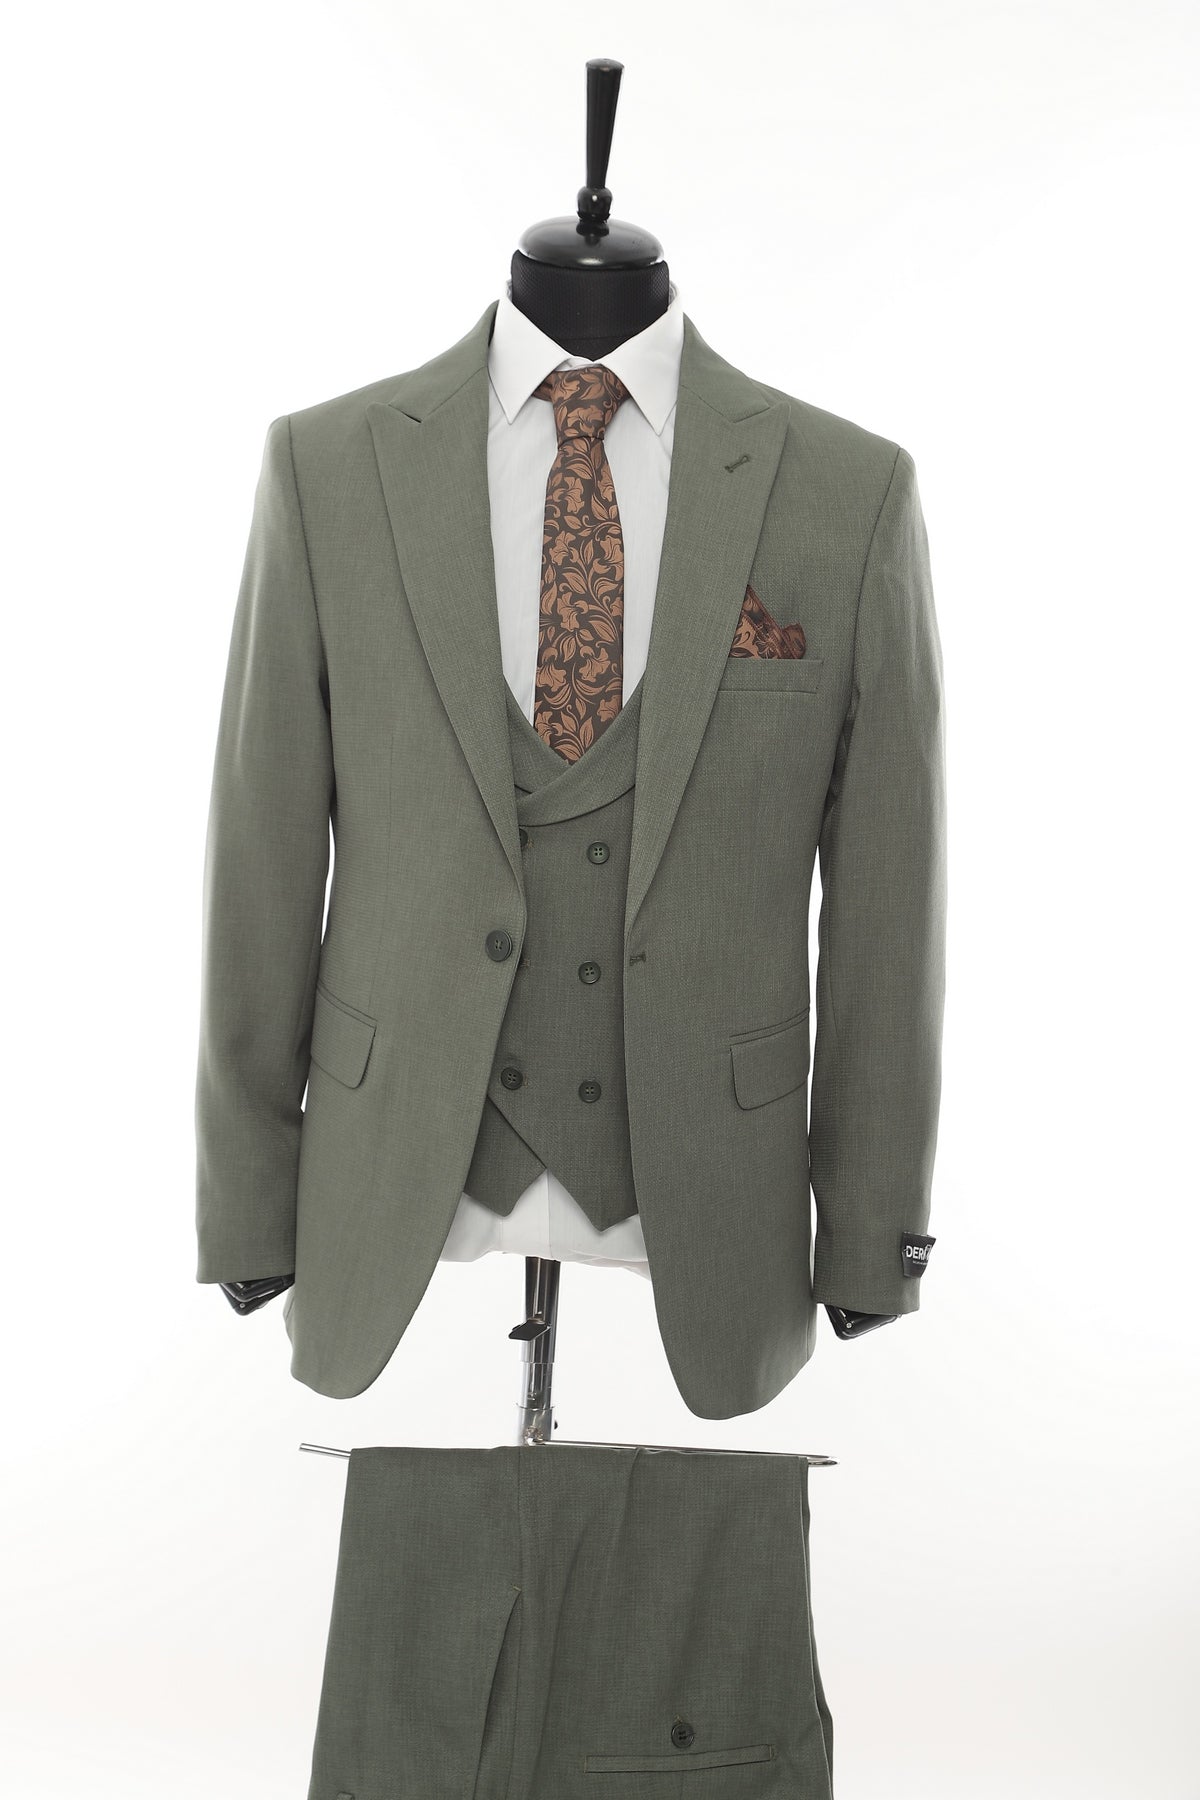 Green Patterned Fabric Luxury Suit 3 Pieces